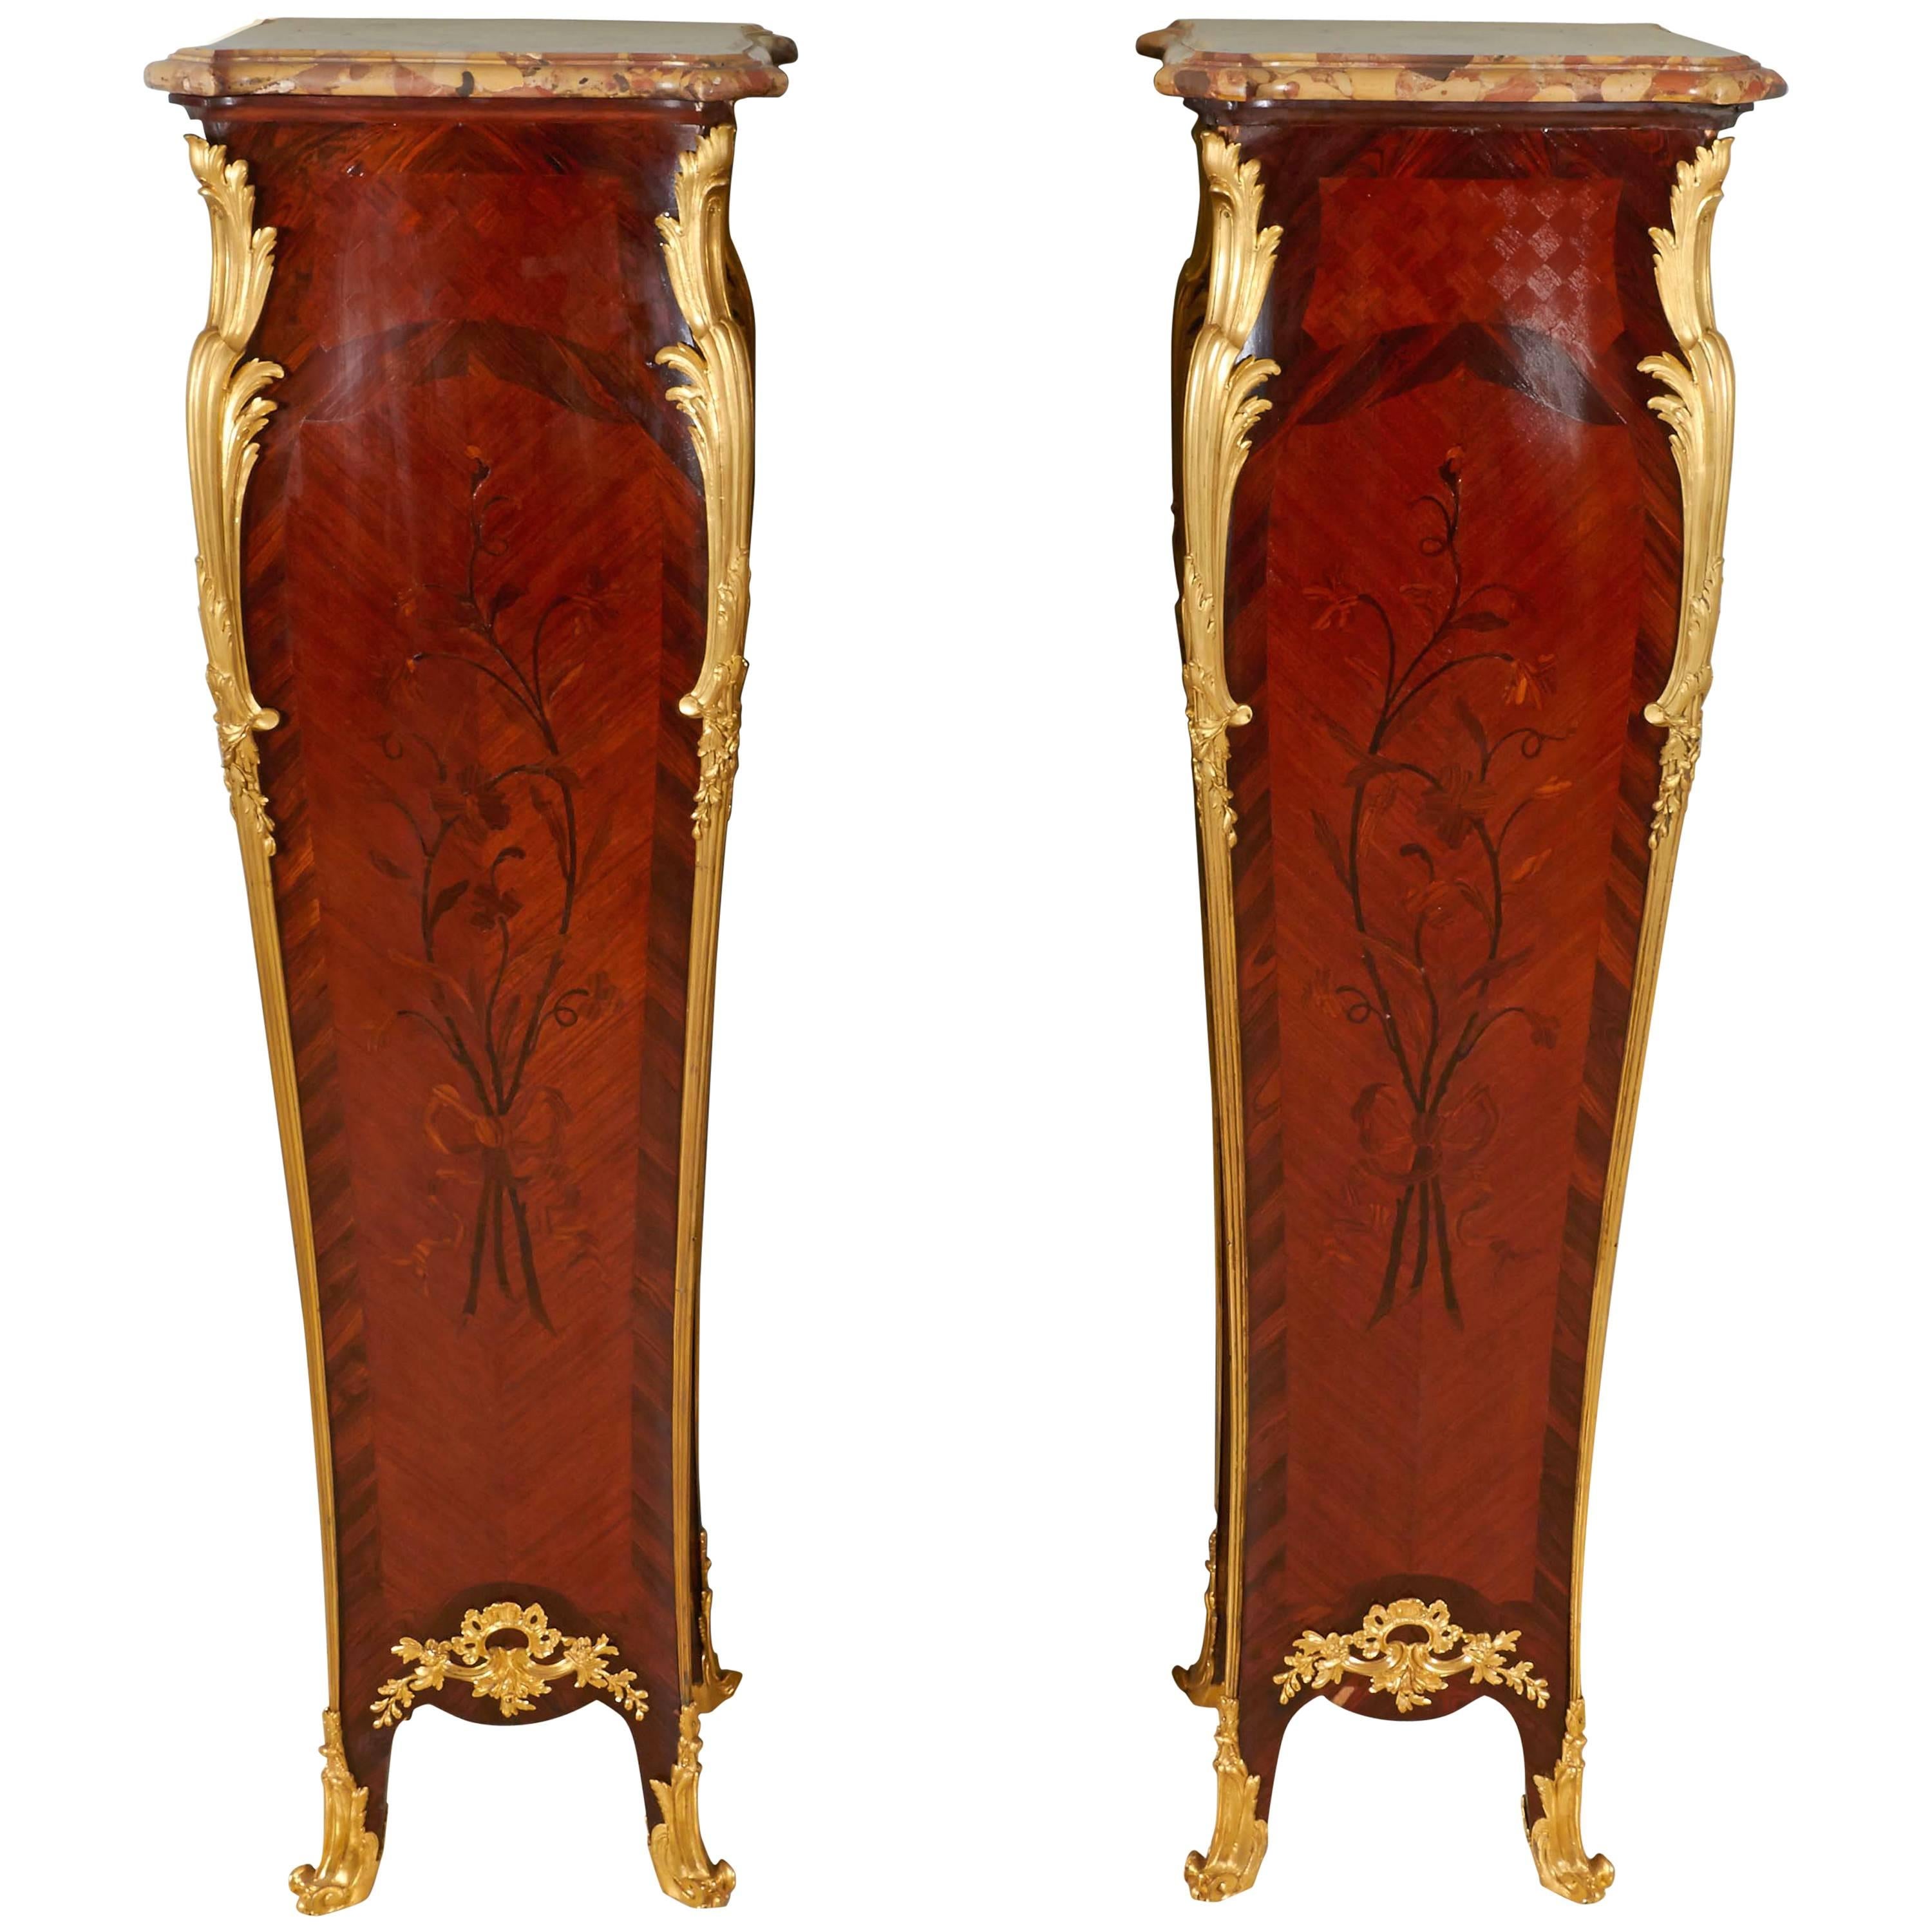 A pair of French ormolu-mounted kingwood marquetry pedestals by Maison Millet. With original marble tops.

The serpentine square breche d'Alep marble top with moulded edge, over bombe form case with cube parquetry, floral marquetry and book